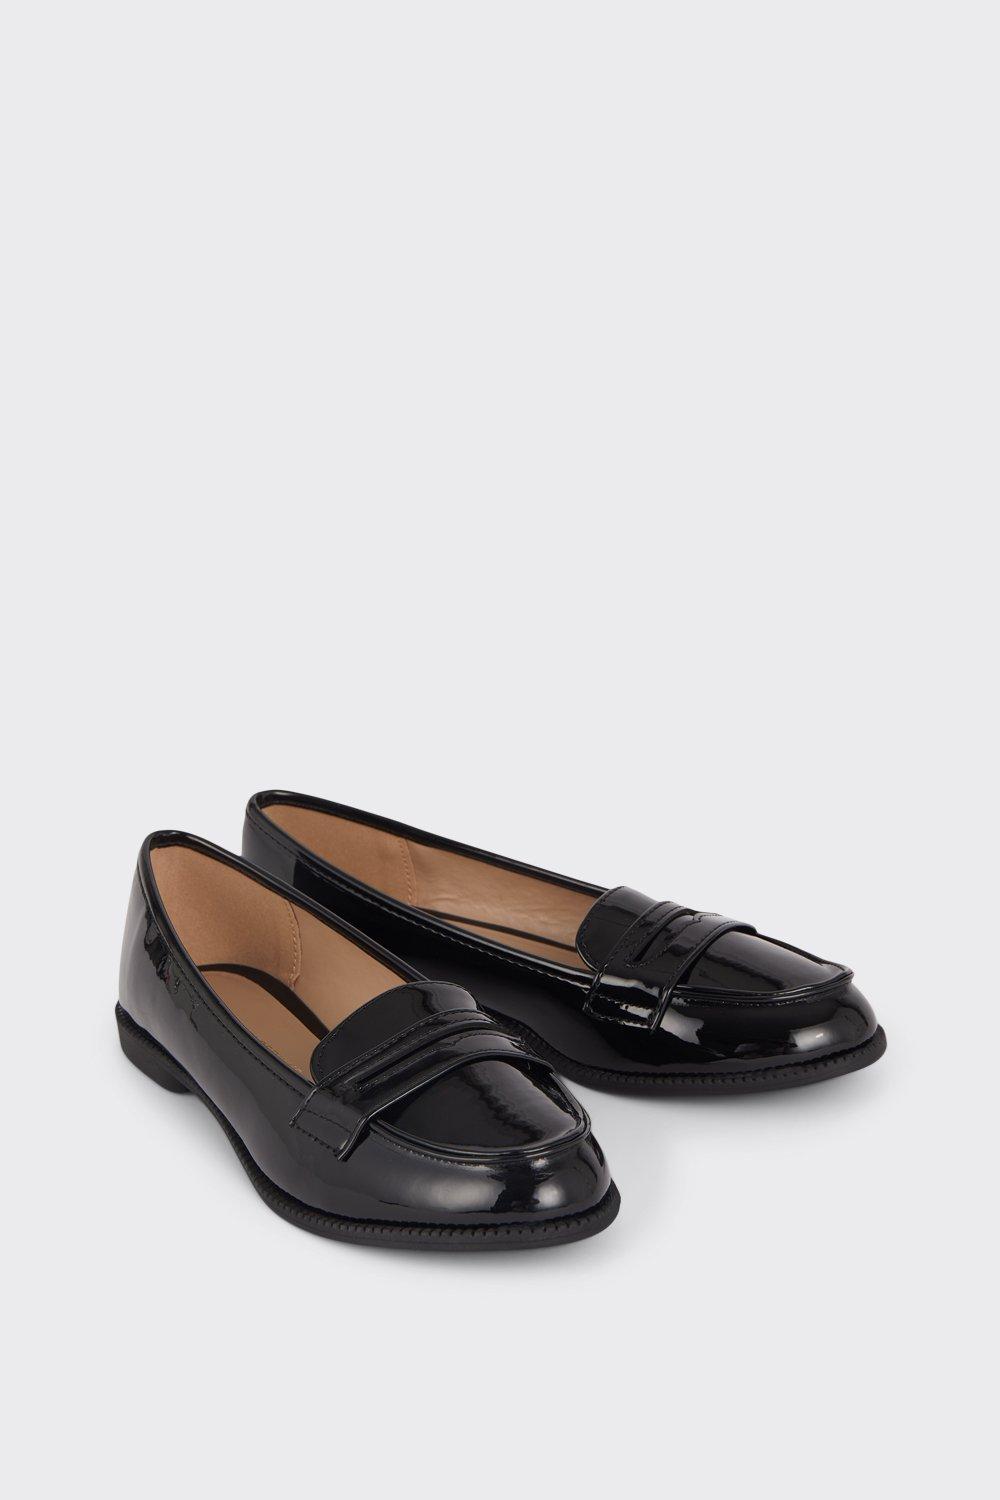 Wide Fit Lara Penny Loafers | Dorothy Perkins